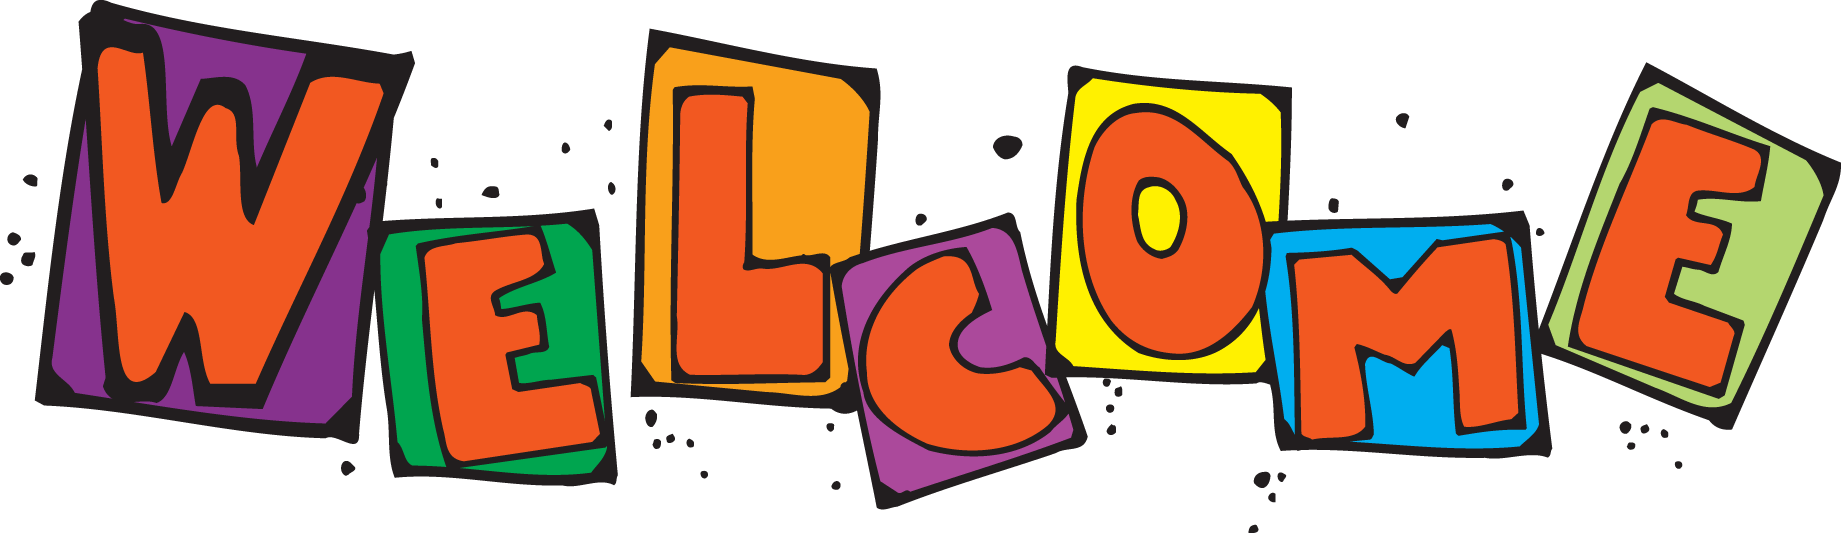 Welcome to preschool clip art free clipart images